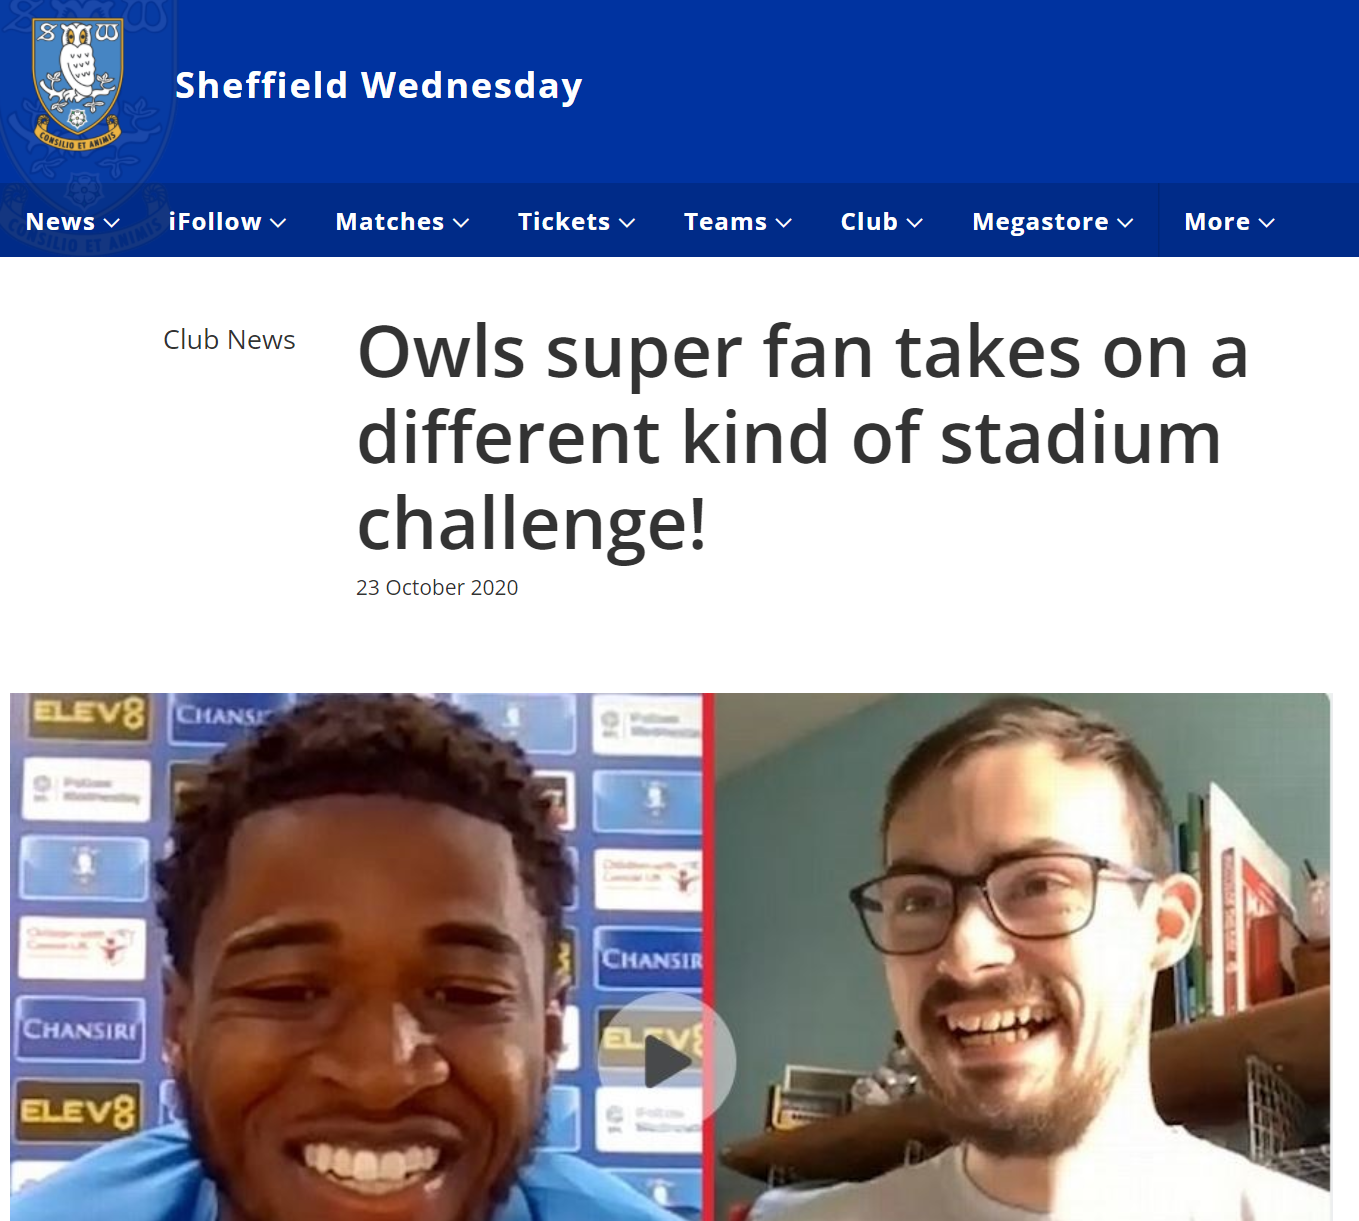 <h2> Niall's beloved Sheffield Wednesday feature his incredible story </h2>